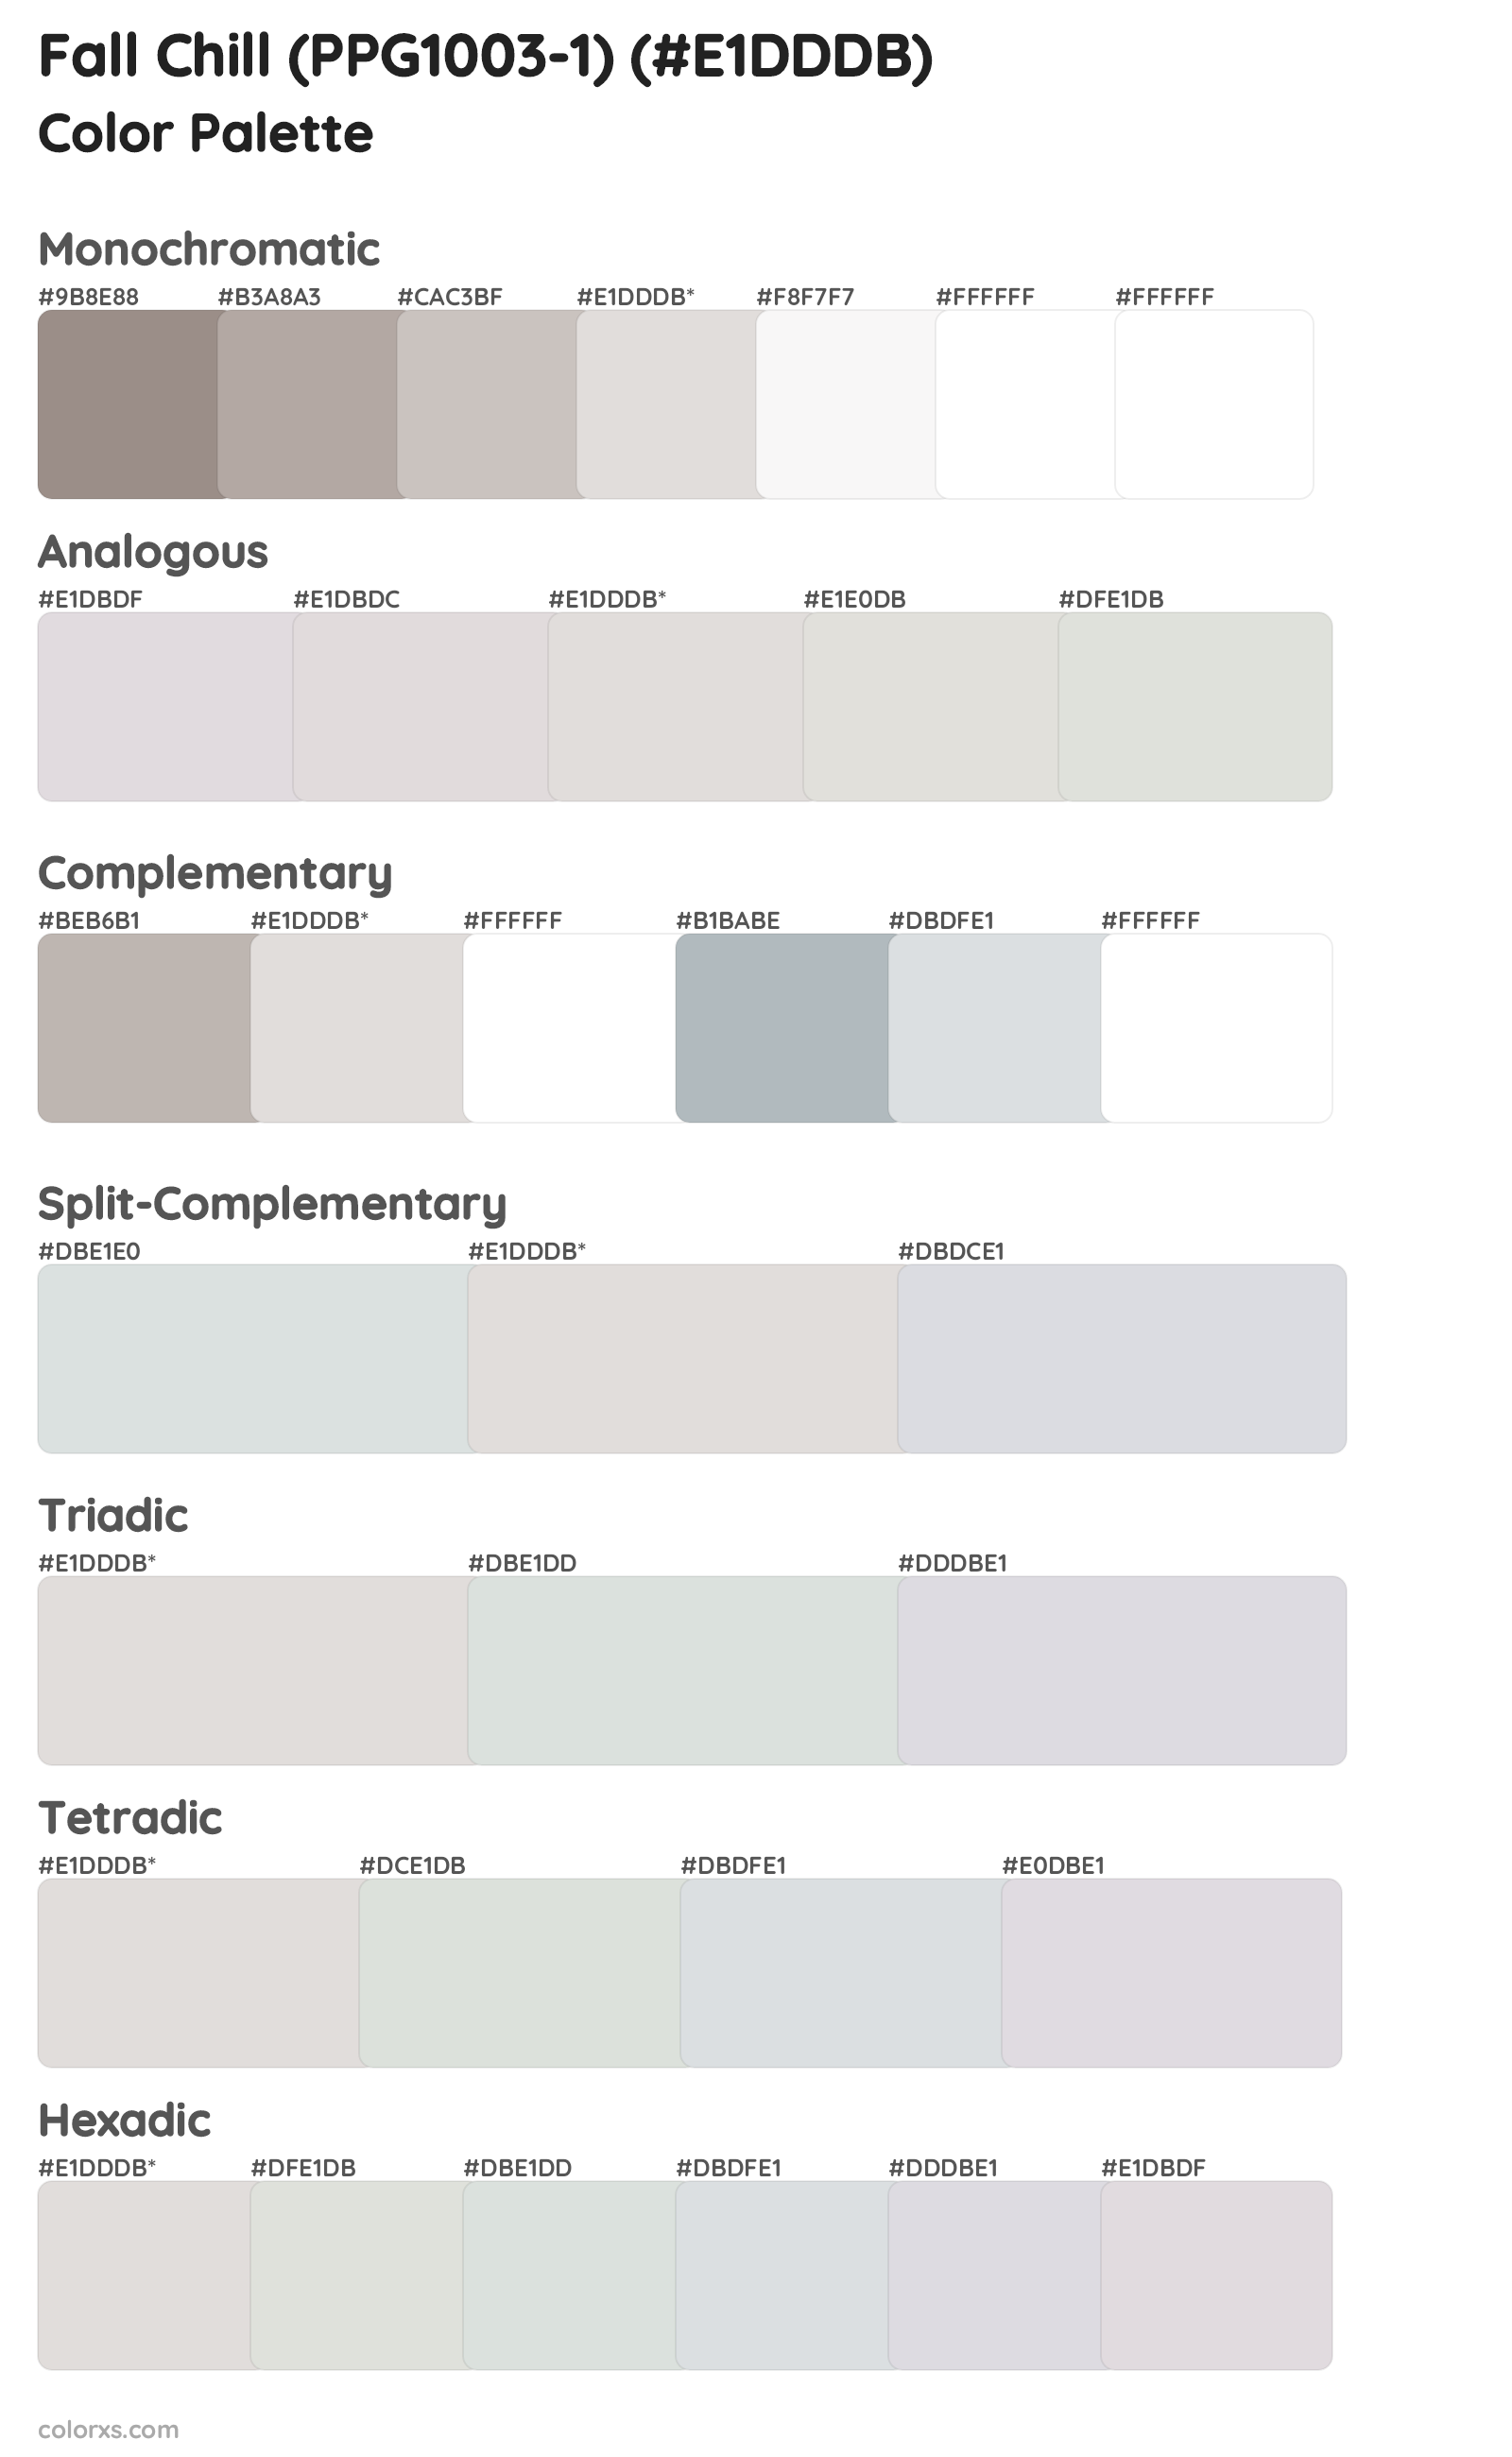 Fall Chill (PPG1003-1) Color Scheme Palettes